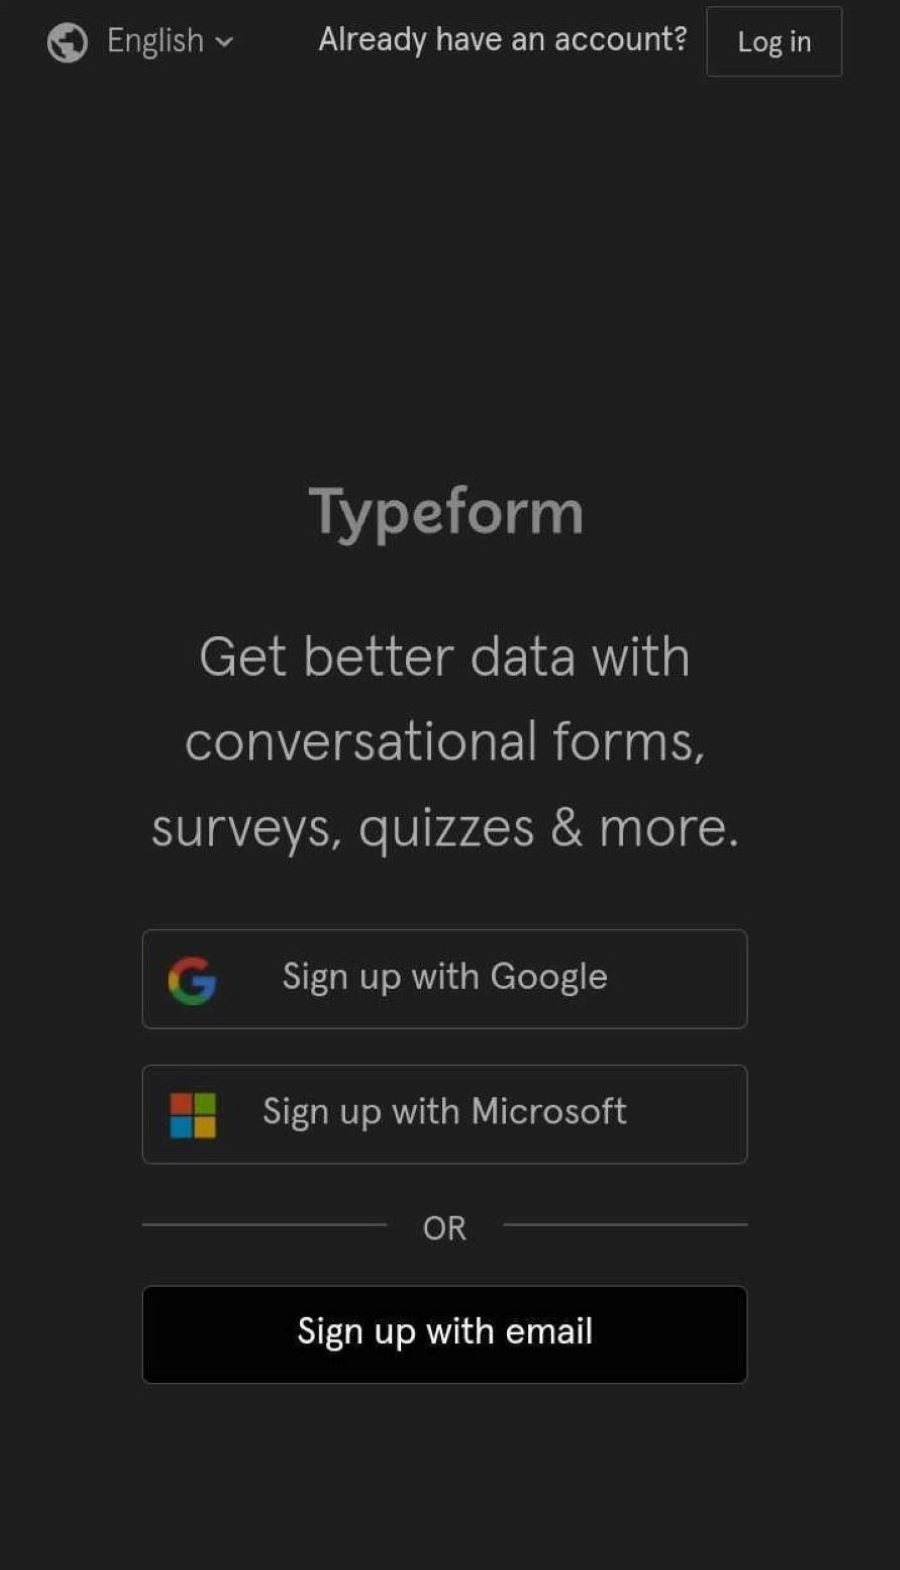 App engagement - Typeform sign-up page